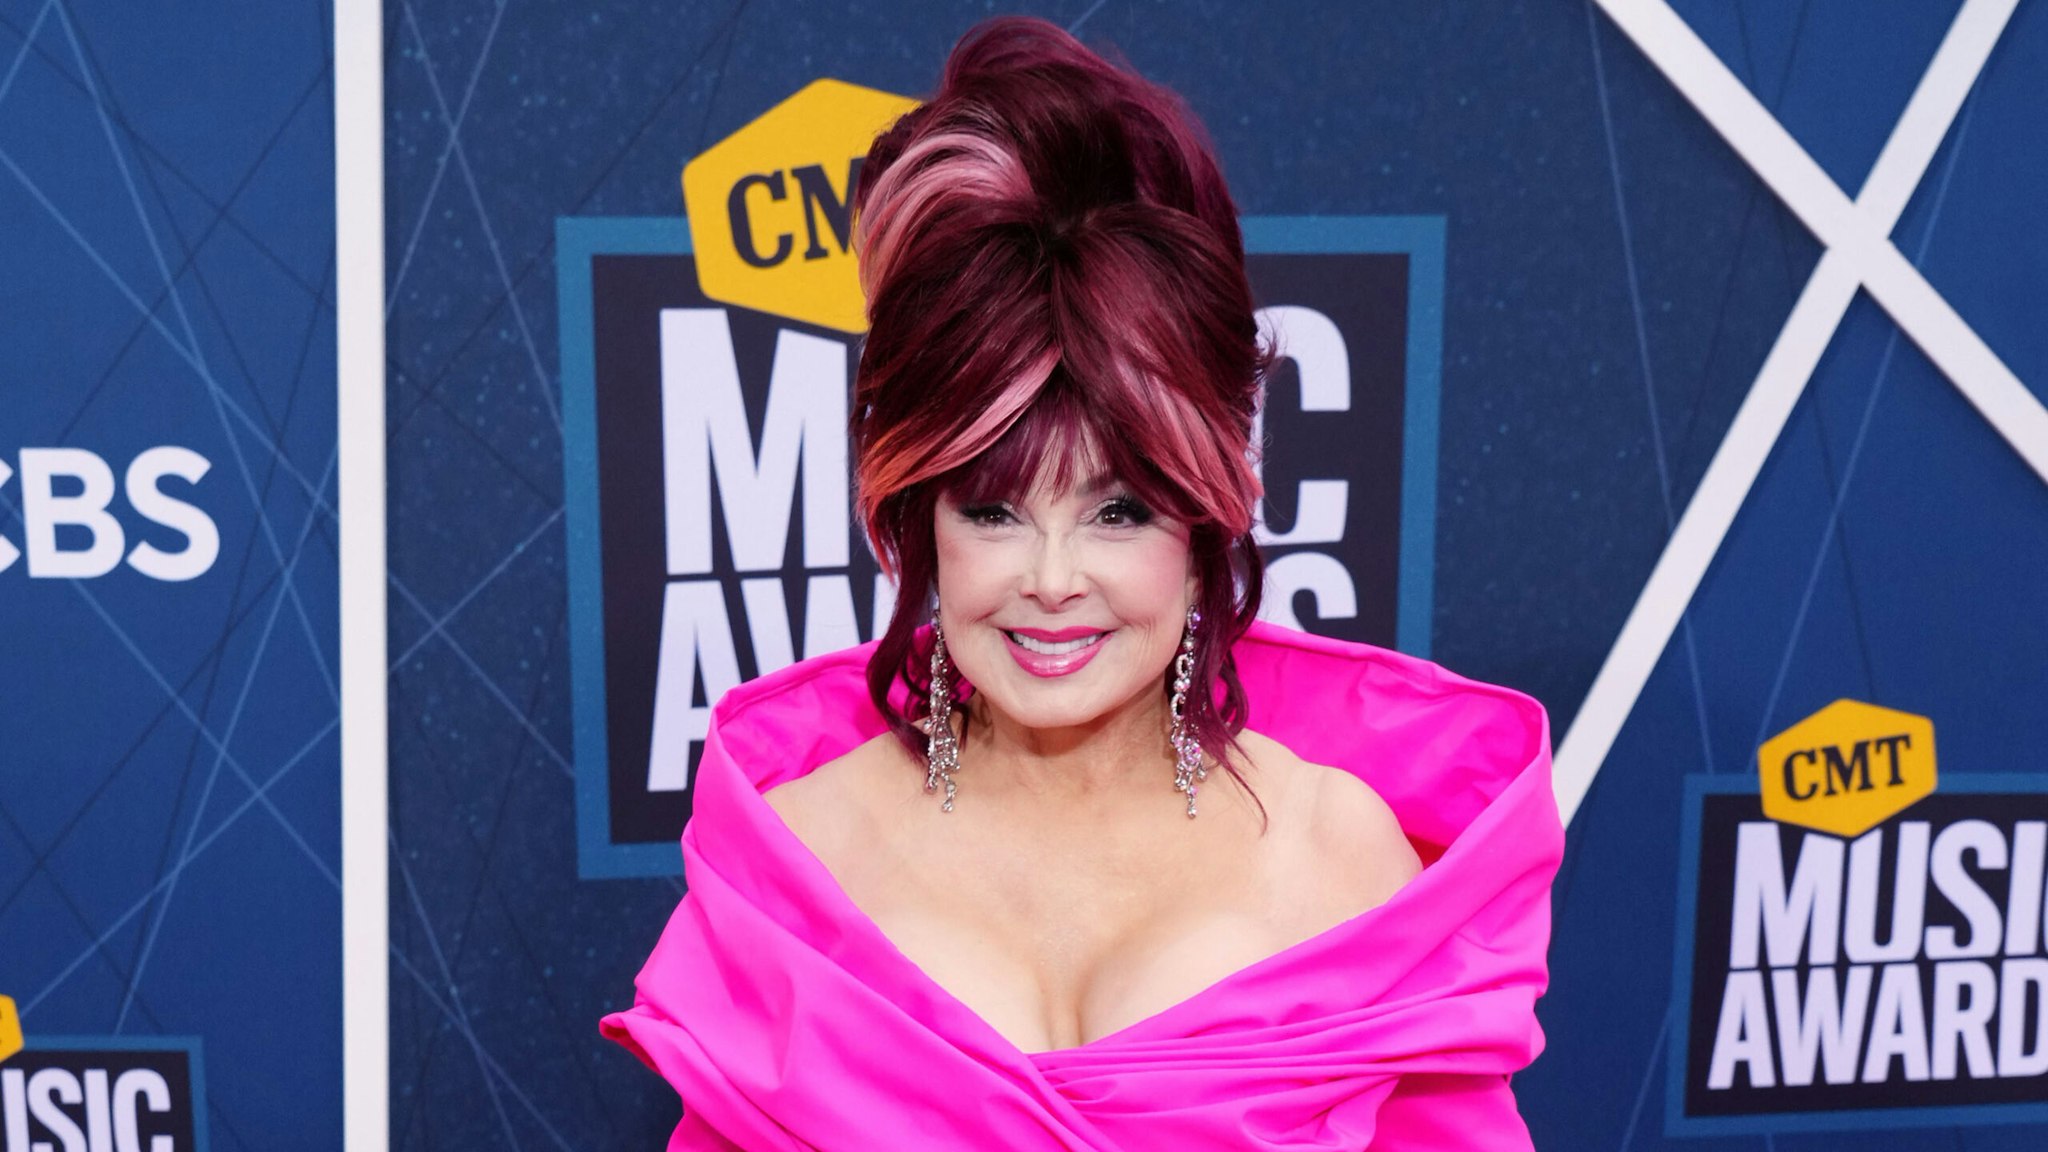 NASHVILLE, TENNESSEE - APRIL 11: Naomi Judd of The Judds attends the 2022 CMT Music Awards at Nashville Municipal Auditorium on April 11, 2022 in Nashville, Tennessee.